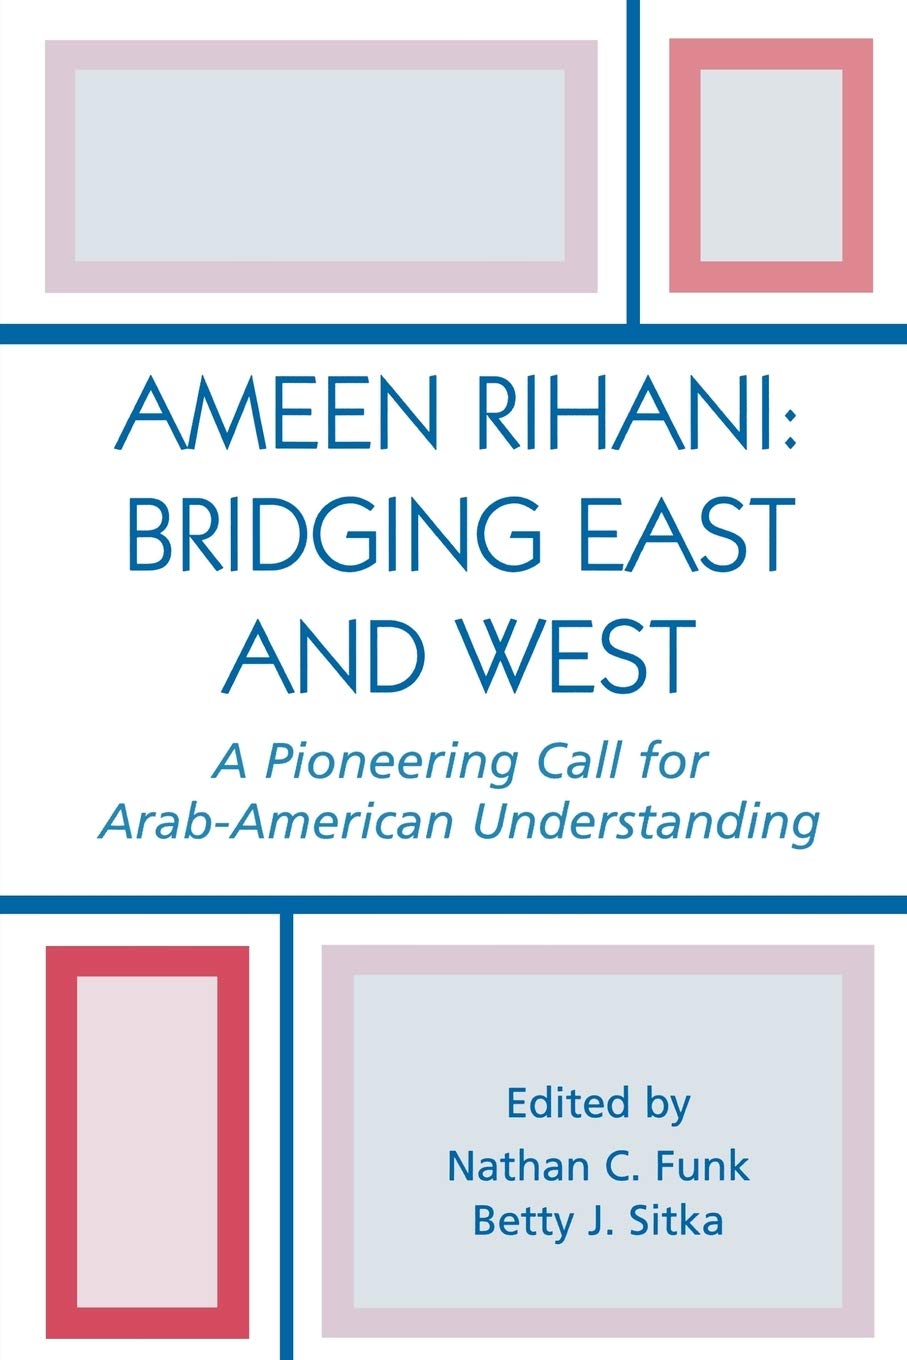 Ameen Rihani: Bridging East And West